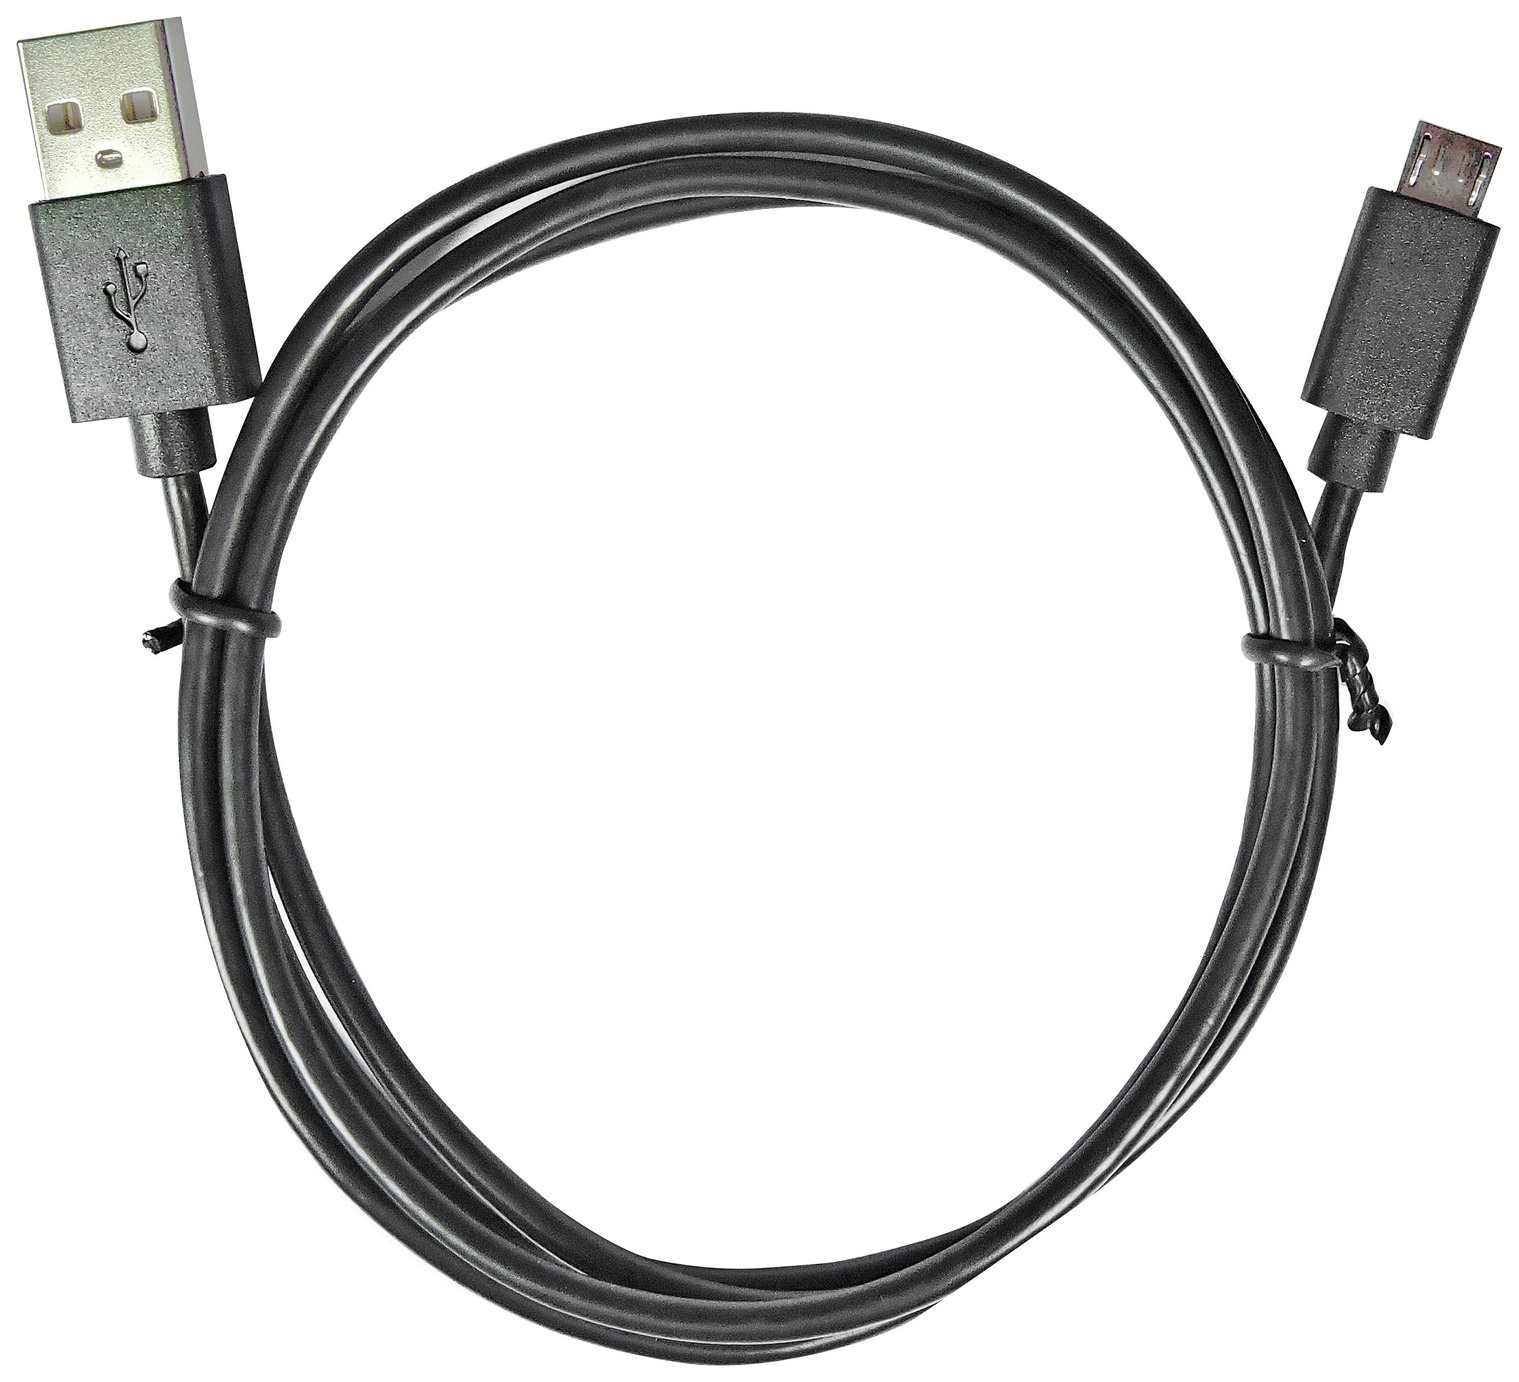 1m Micro USB Cable Review